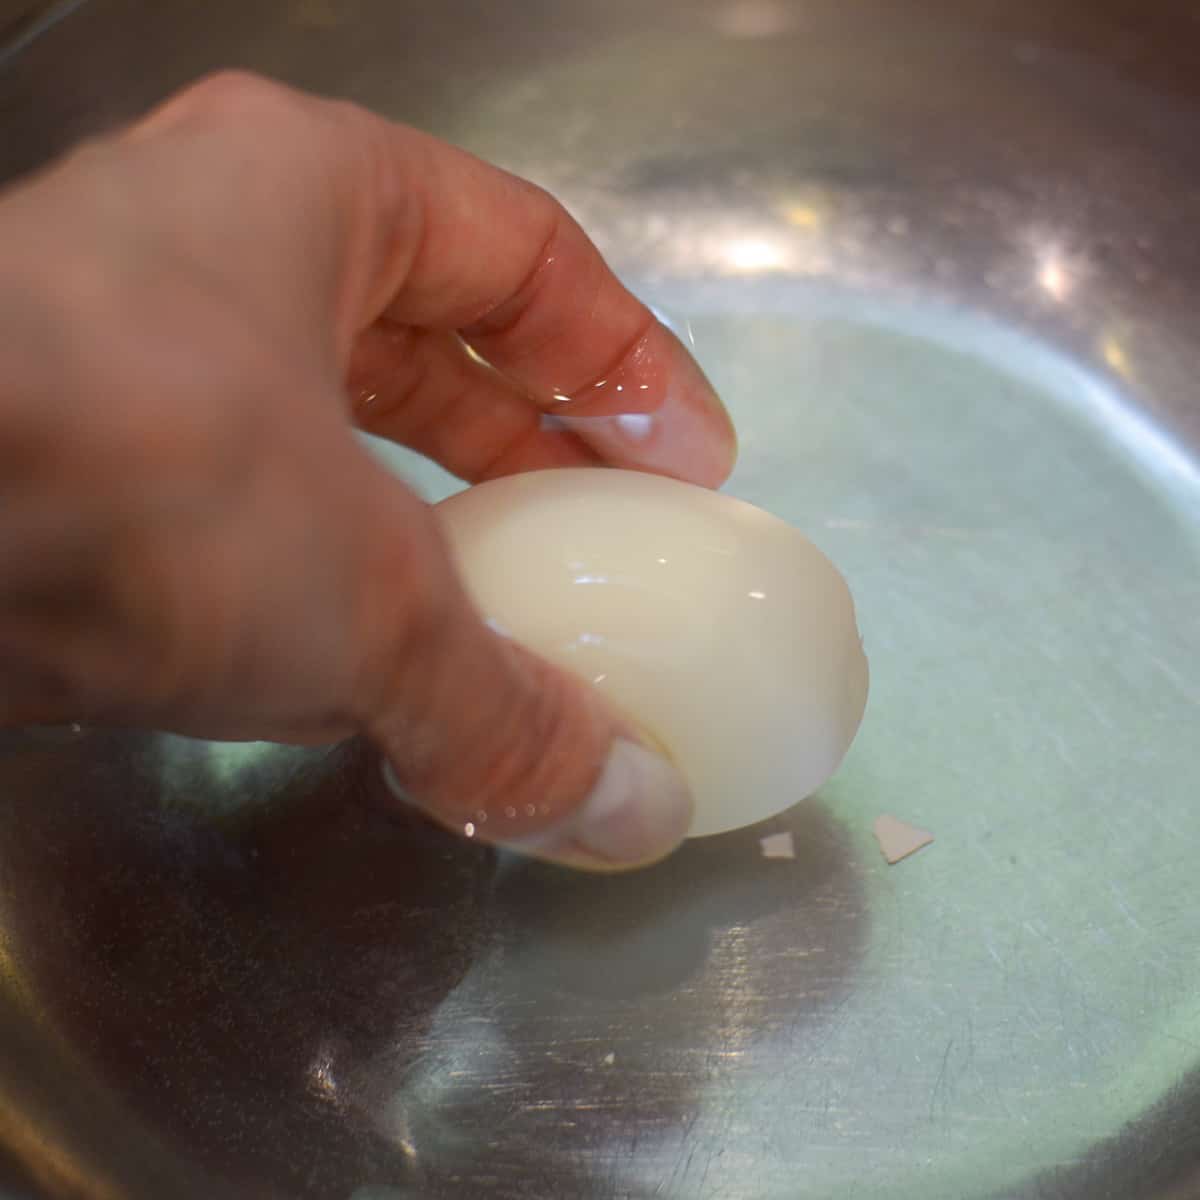 A hand dipping a peeled egg into a bowl of water.